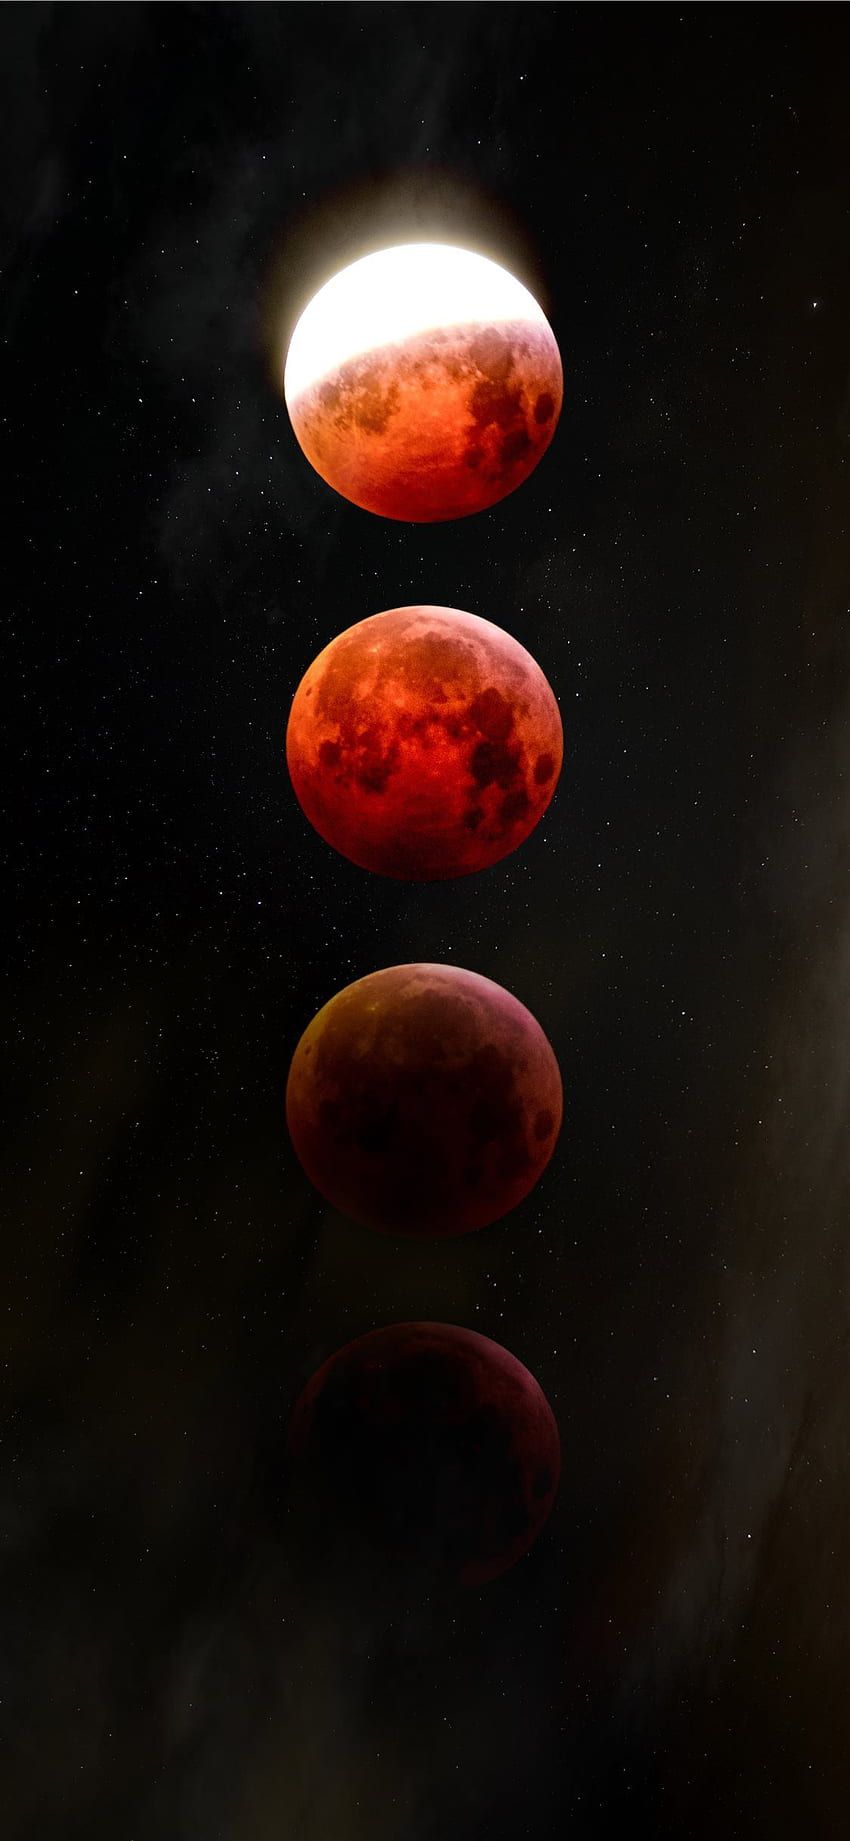 A total lunar eclipse is visible in the night sky. - Eclipse